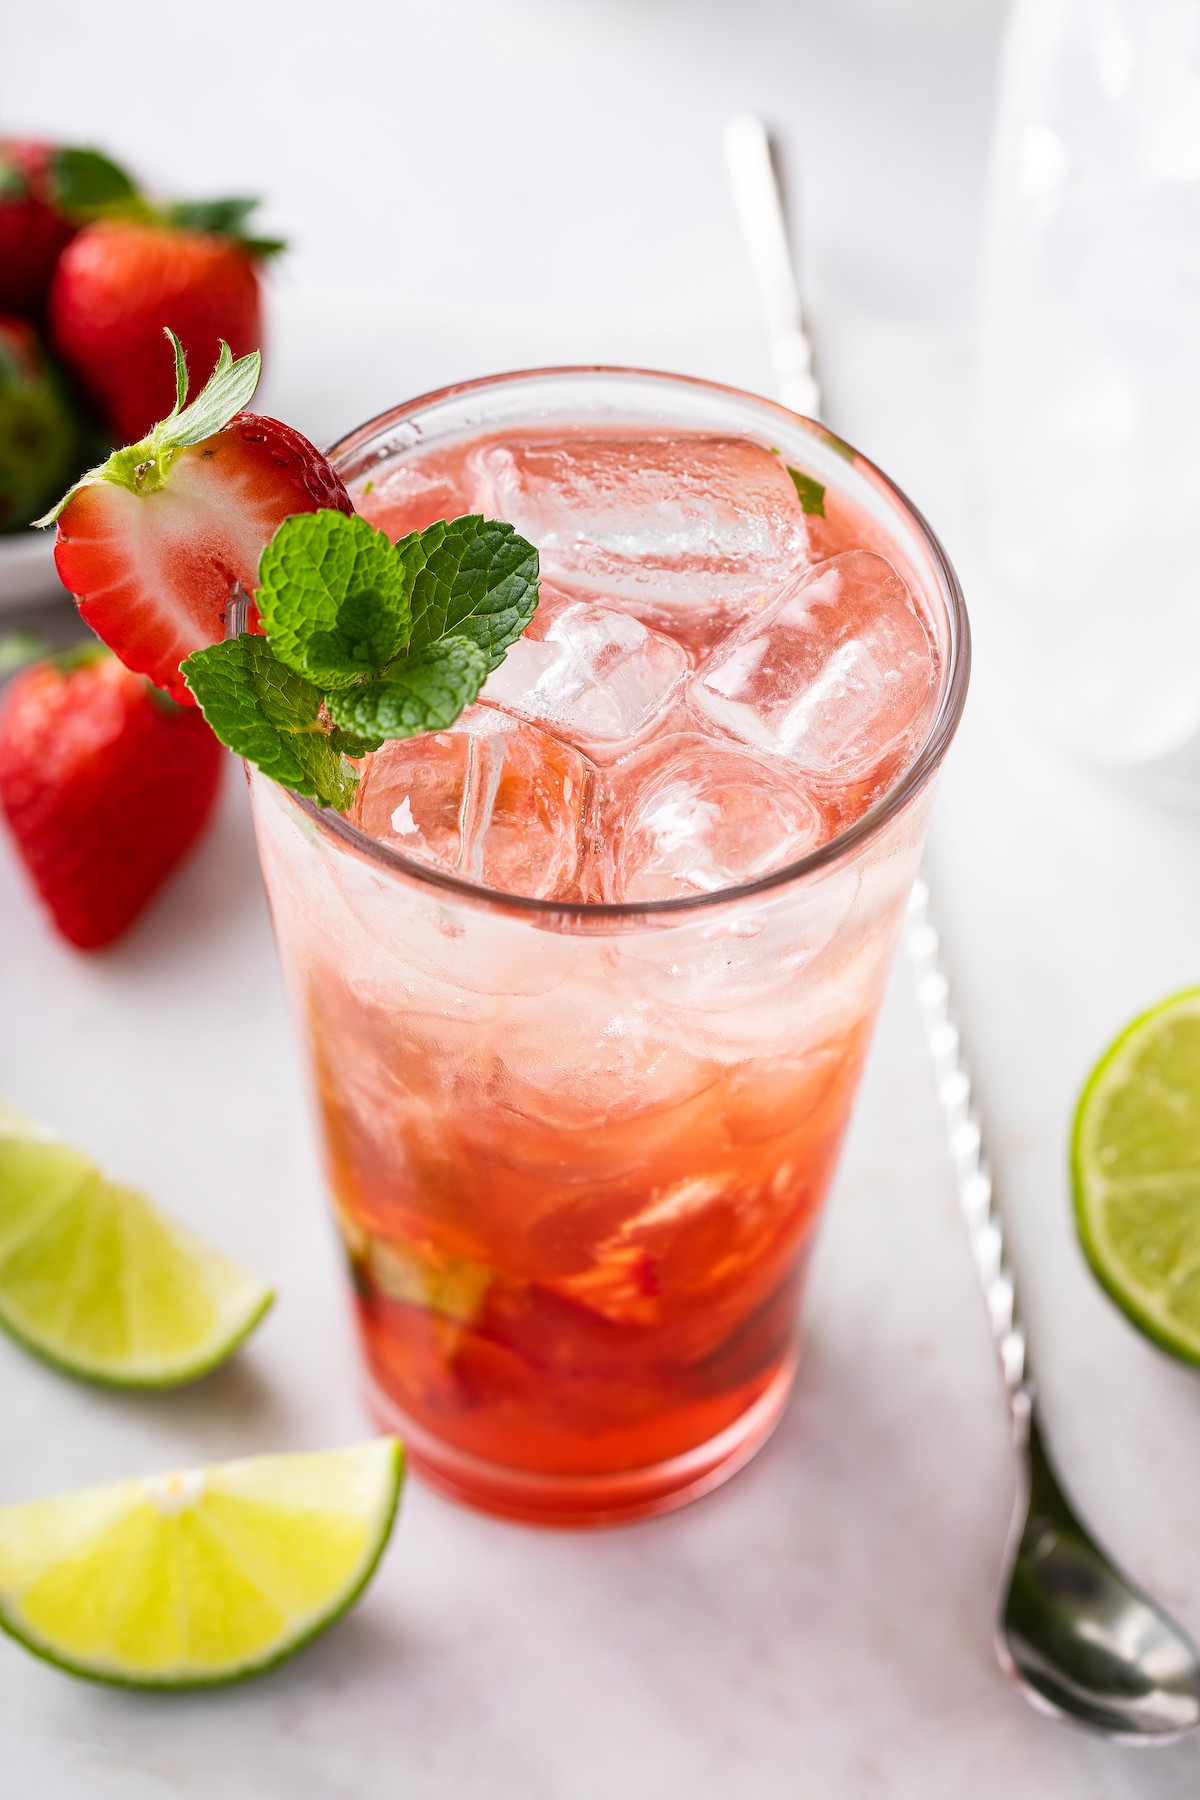 A cocktail garnished with fresh mint and strawberry.